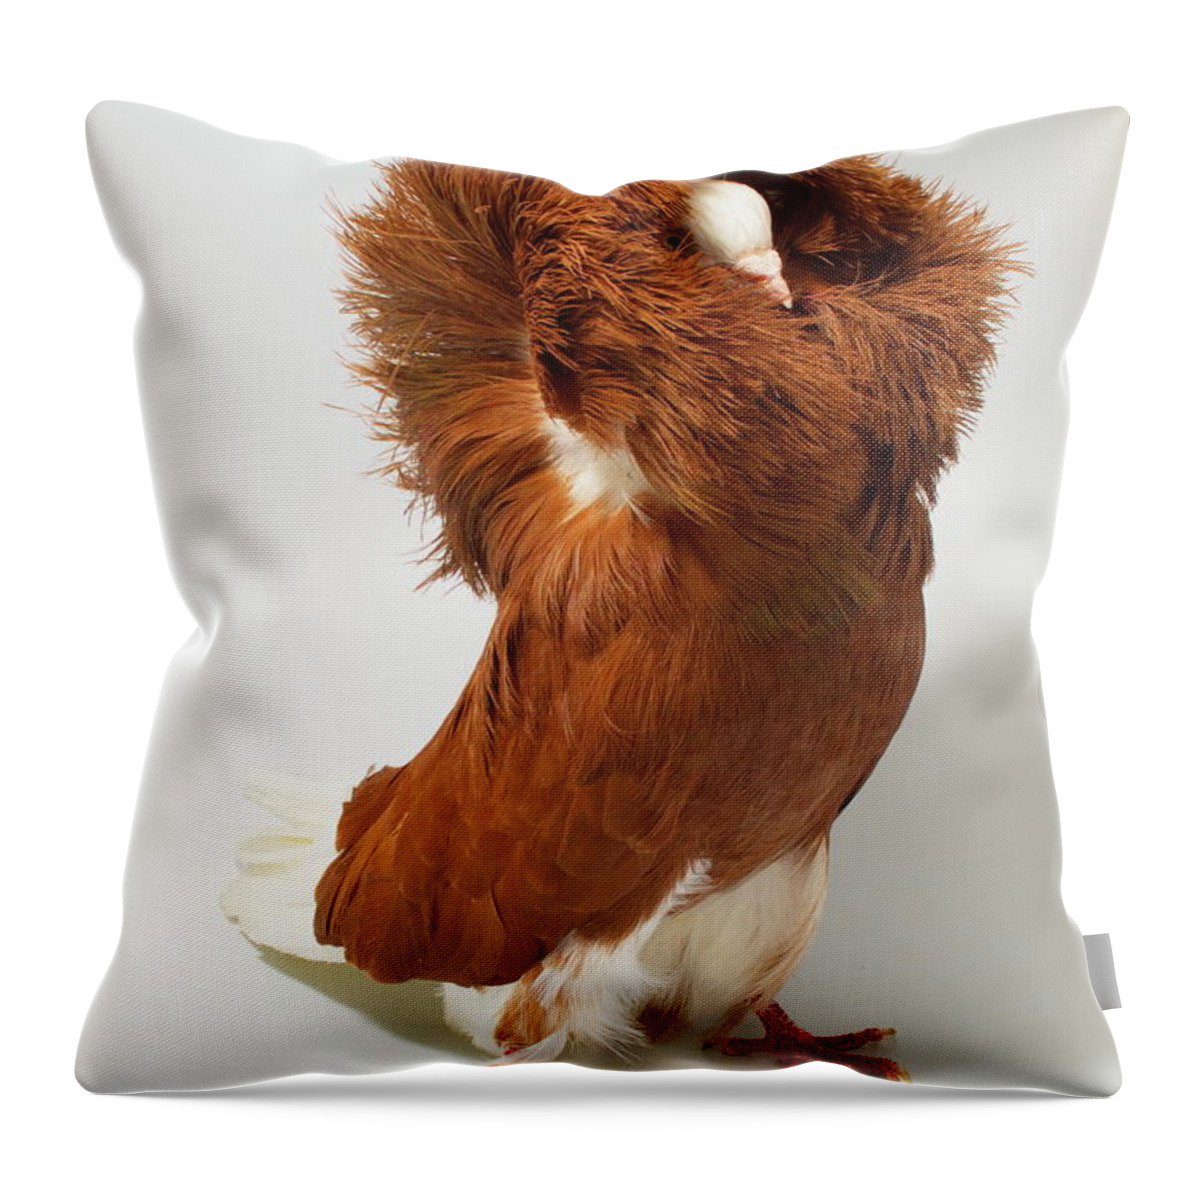 Pigeon Throw Pillow featuring the photograph Red Jacobin Pigeon by Nathan Abbott